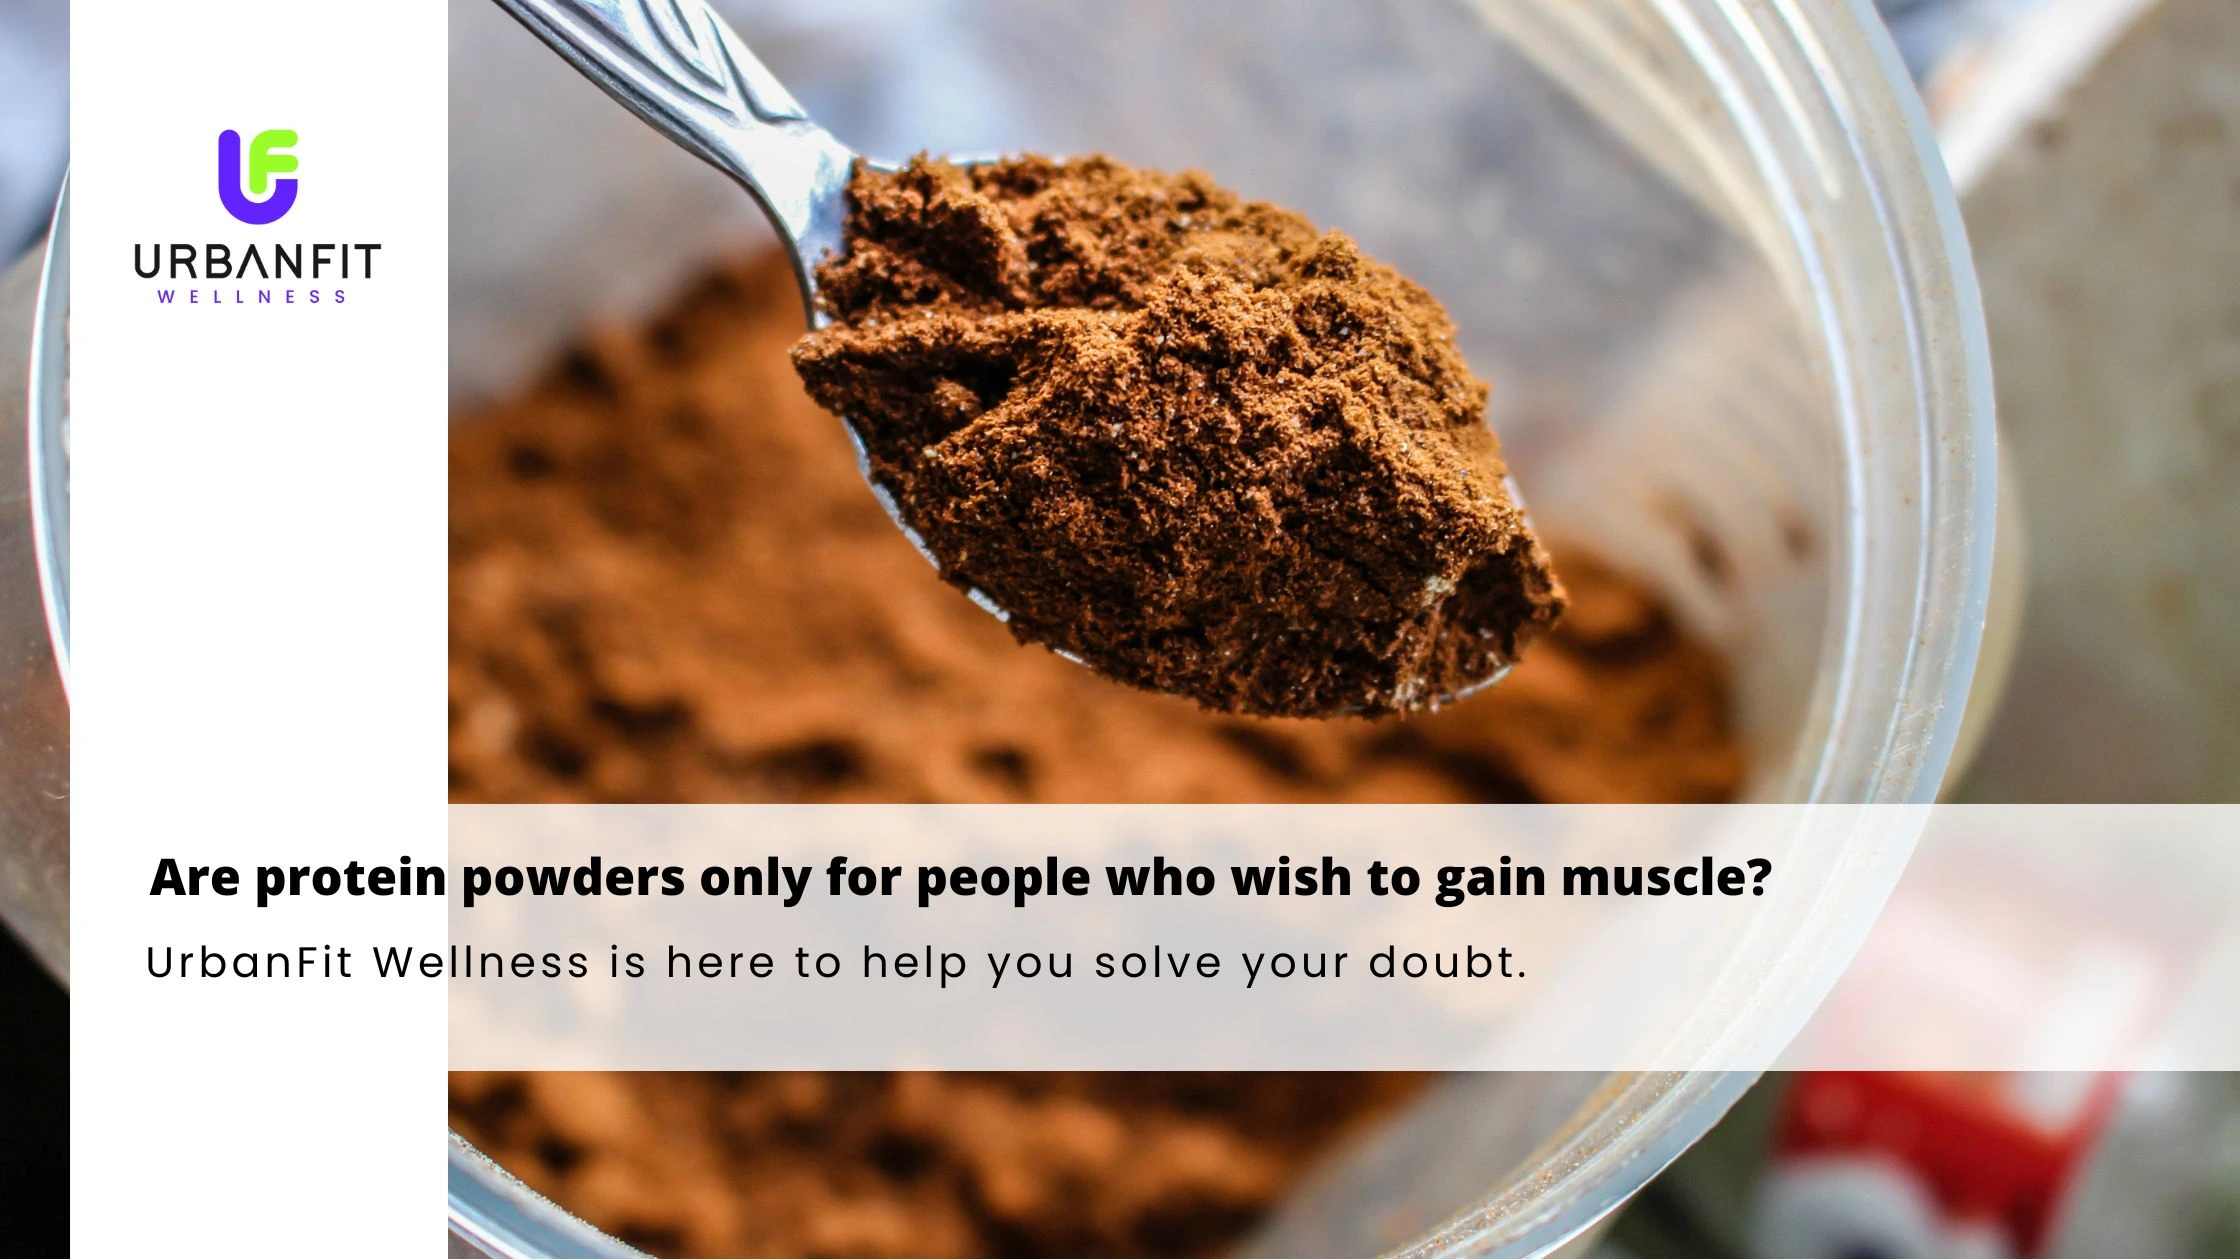 Are protein powders only for people who wish to gain muscle?